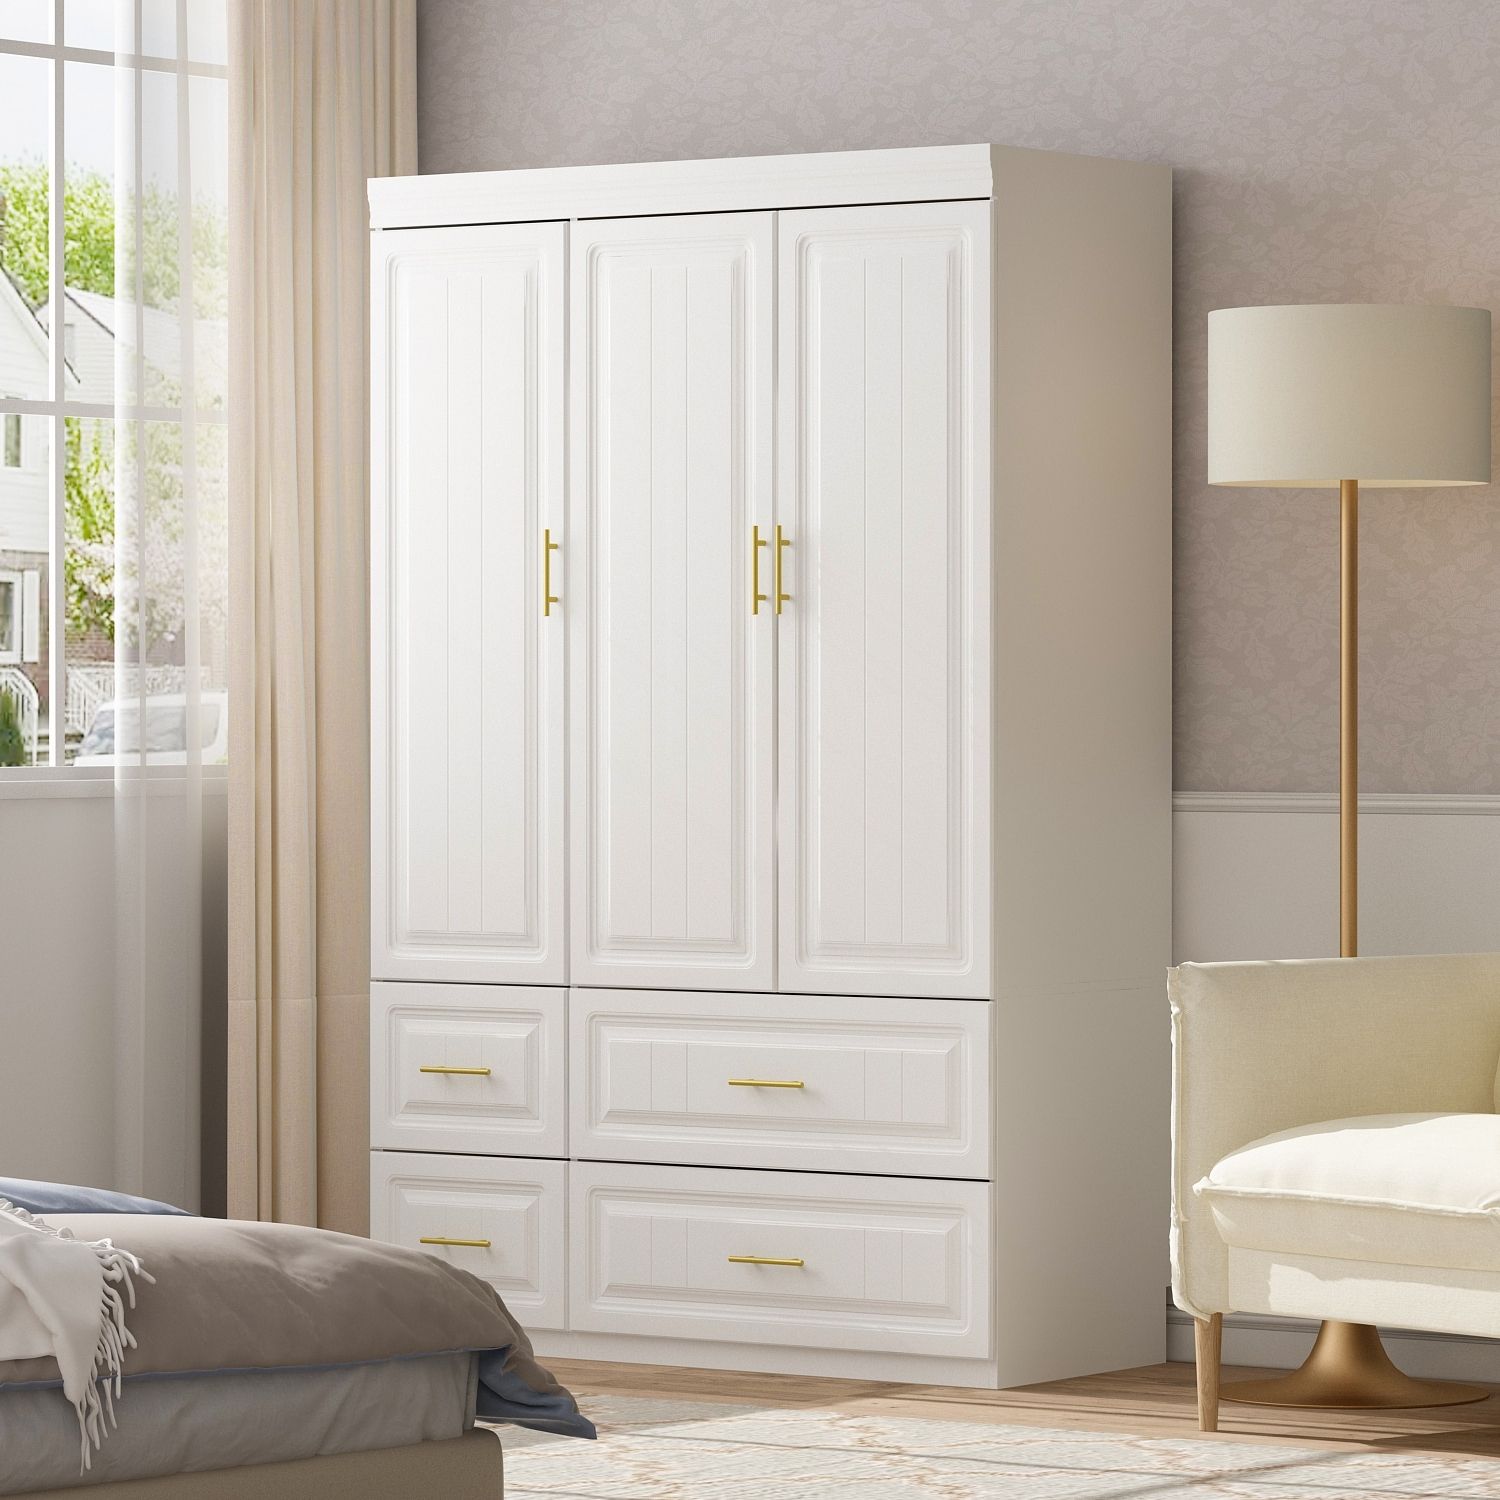 Modern Freestanding Wardrobe Armoire Closet High Cabinet Storage White –  Bed Bath & Beyond – 36256383 With Regard To White And Pine Wardrobes (Gallery 1 of 12)